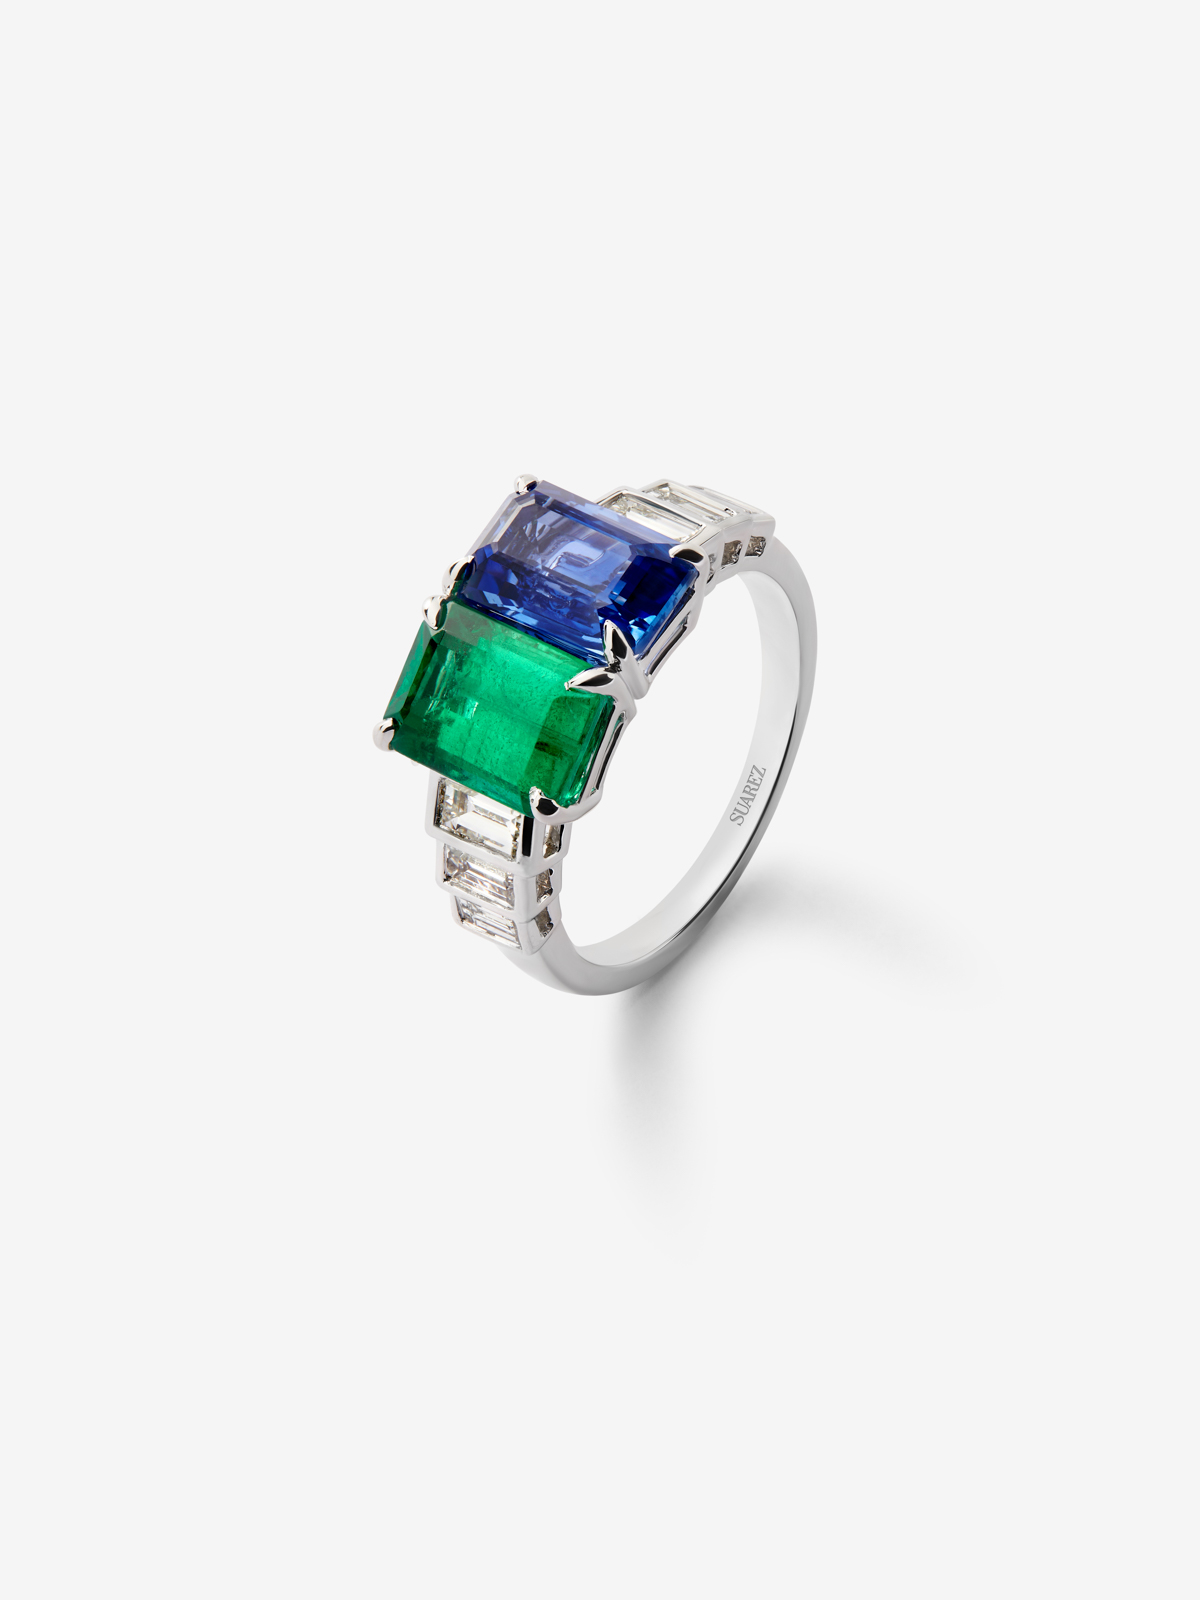 You and 18k white gold ring with blue sapphire in 2.82, green emerald in octagonal size 1.98 cts and white diamonds in 0.69 cts baggos